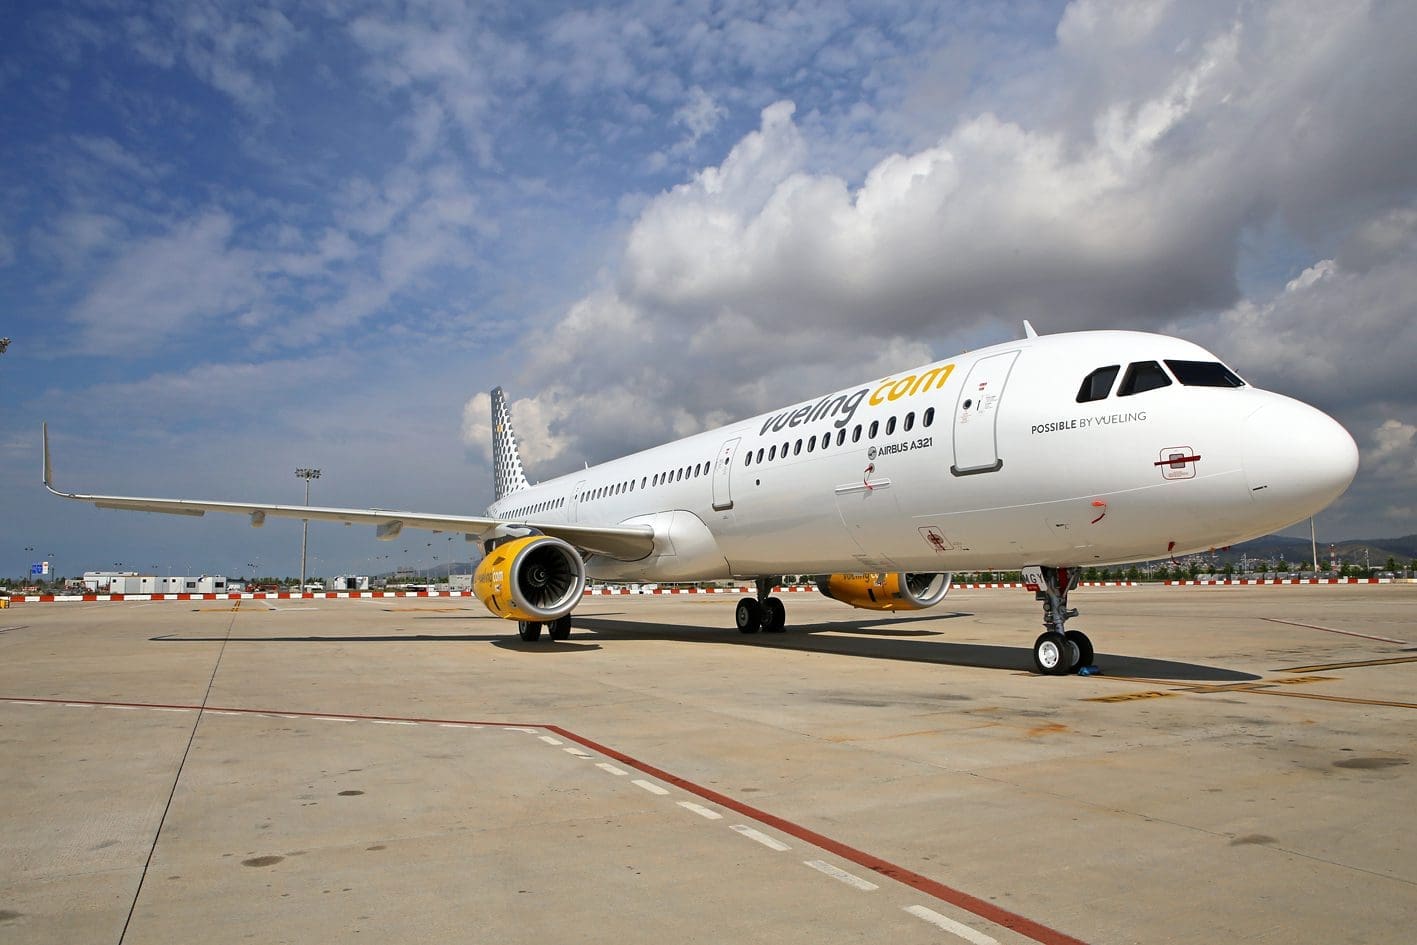 Vueling New Green Menu & Sustainable Options